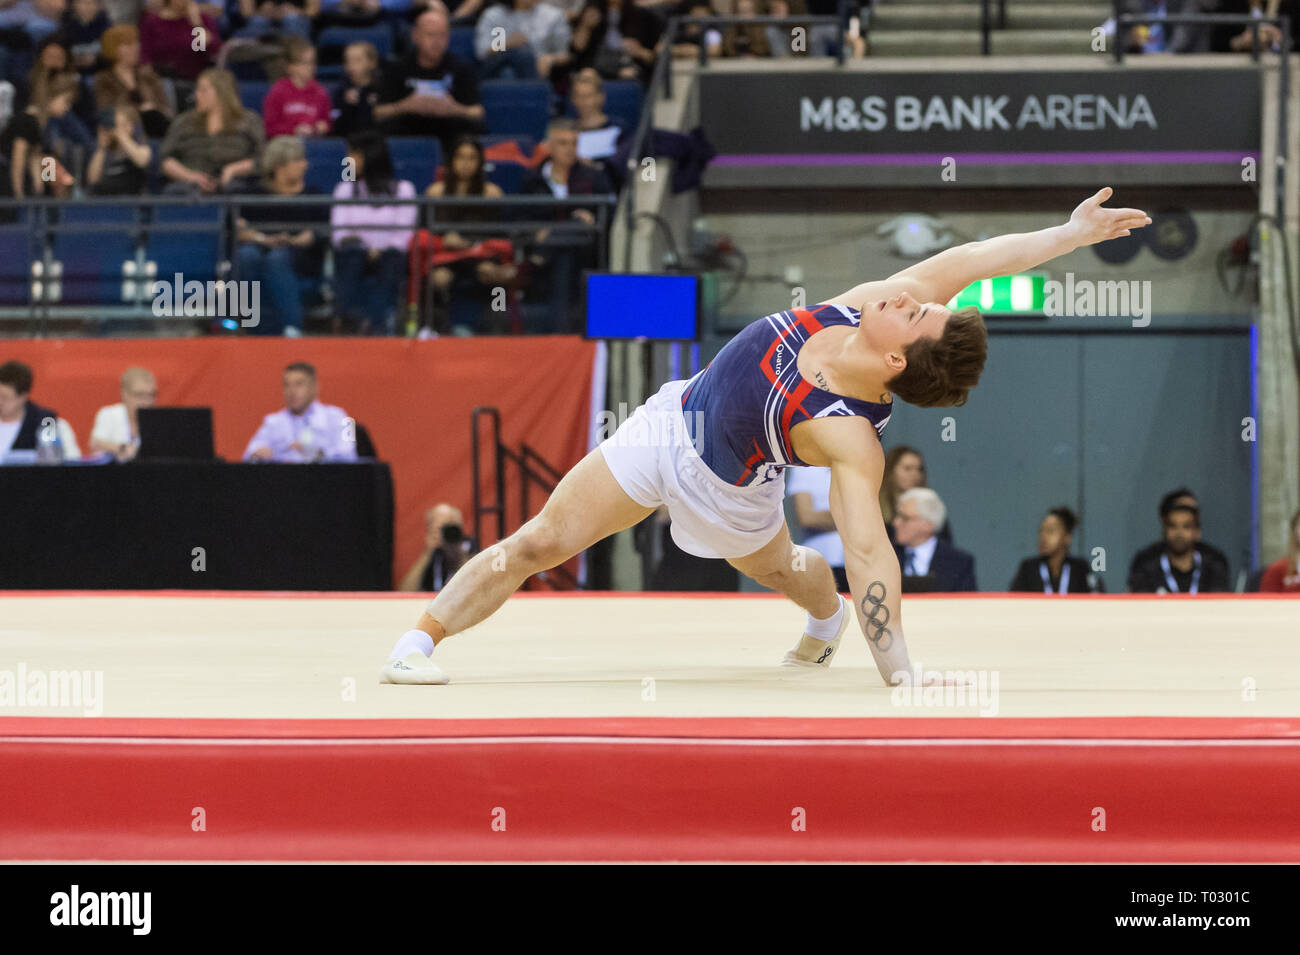 Liverpool, UK. 17th March 2019. Brinn Bevan of South Essex Gymnastics competing at the Men’s and Women’s Artistic British Championships 2019, M&S Bank Arena, Liverpool, UK. Stock Photo